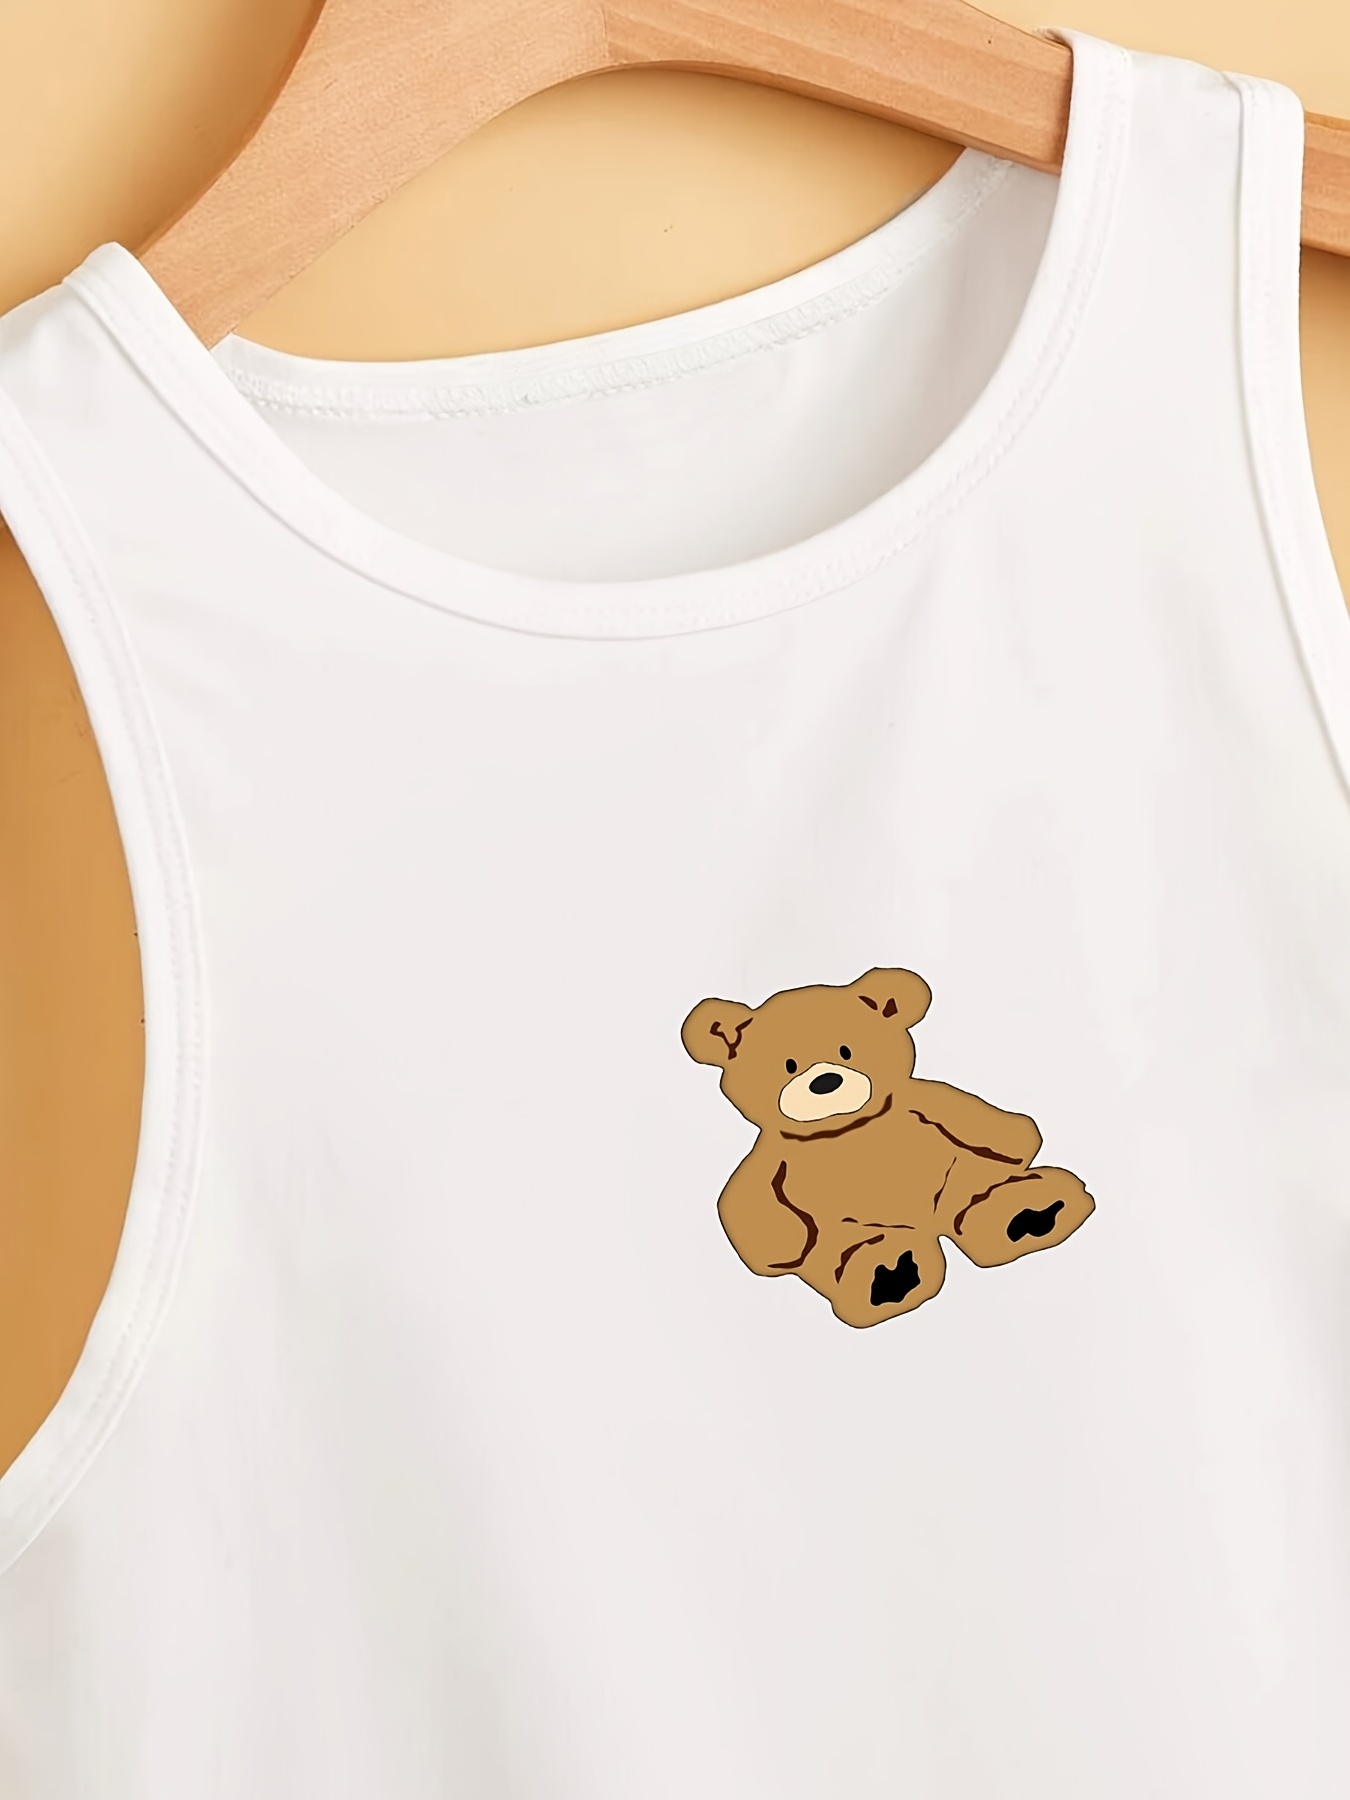  Women's T-Shirt Teddy Bear and Letter Graphic Drop